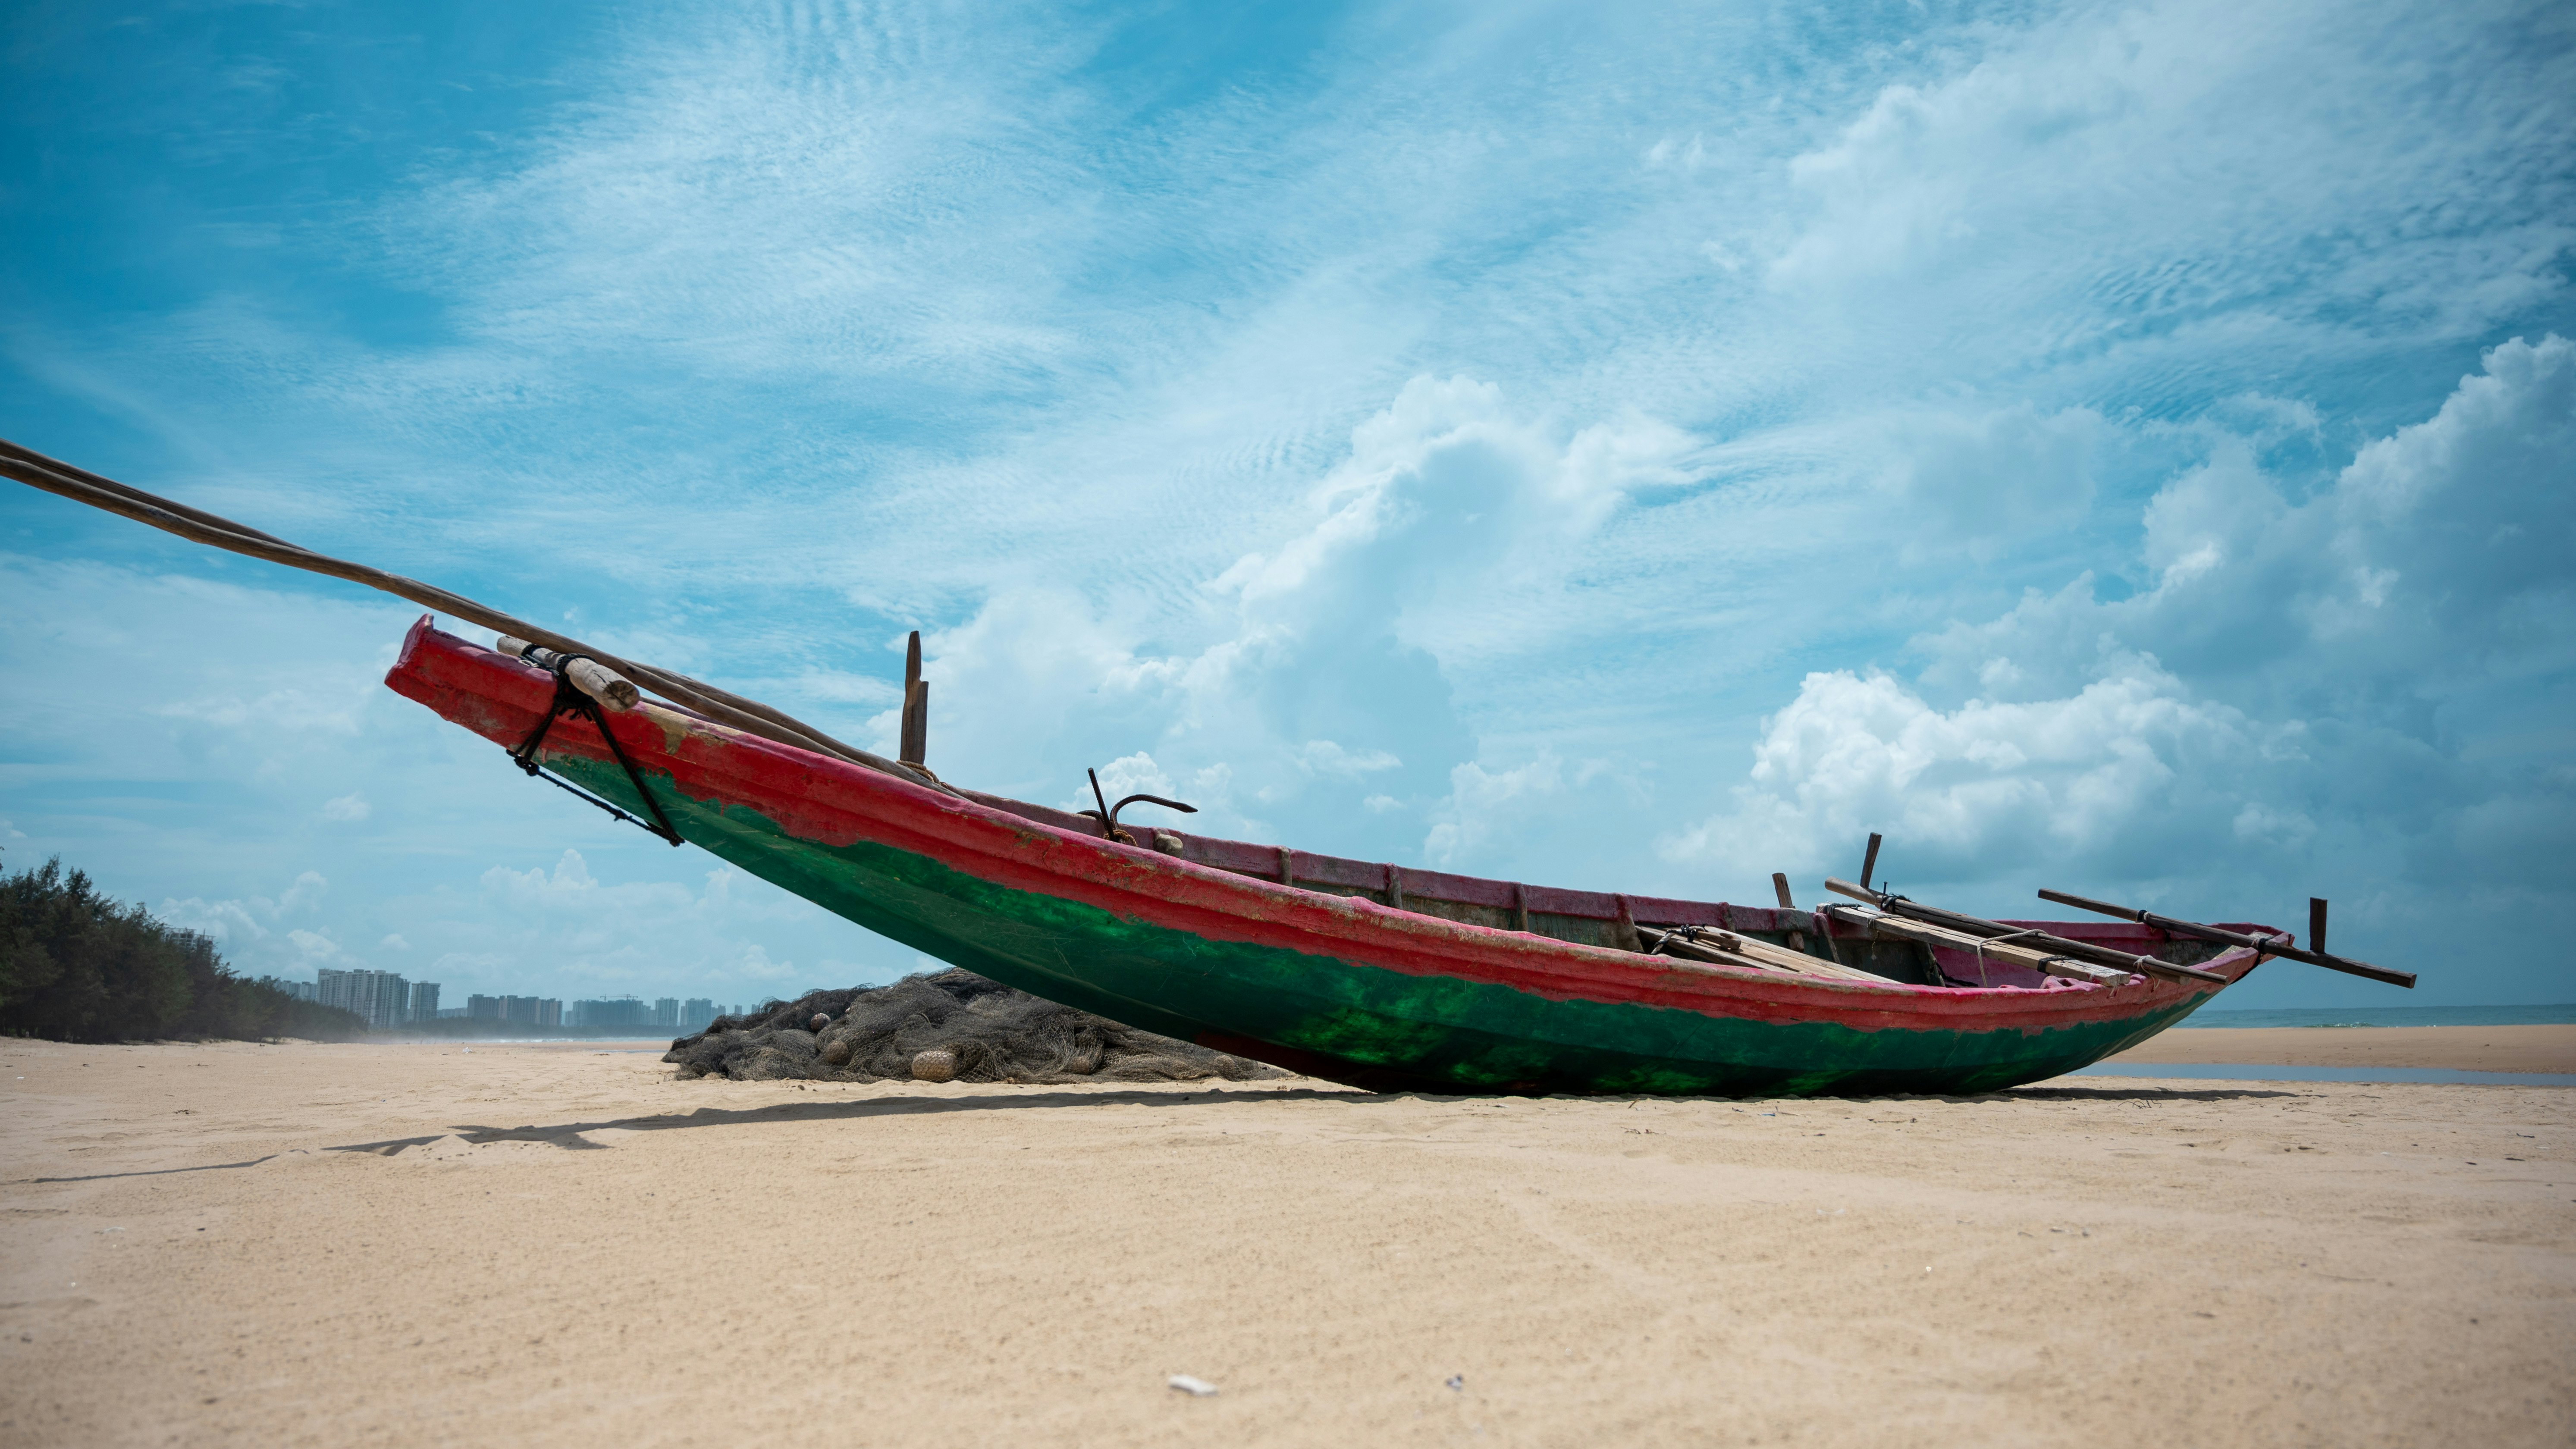 red and green boat on brown sand under blue sky during daytime